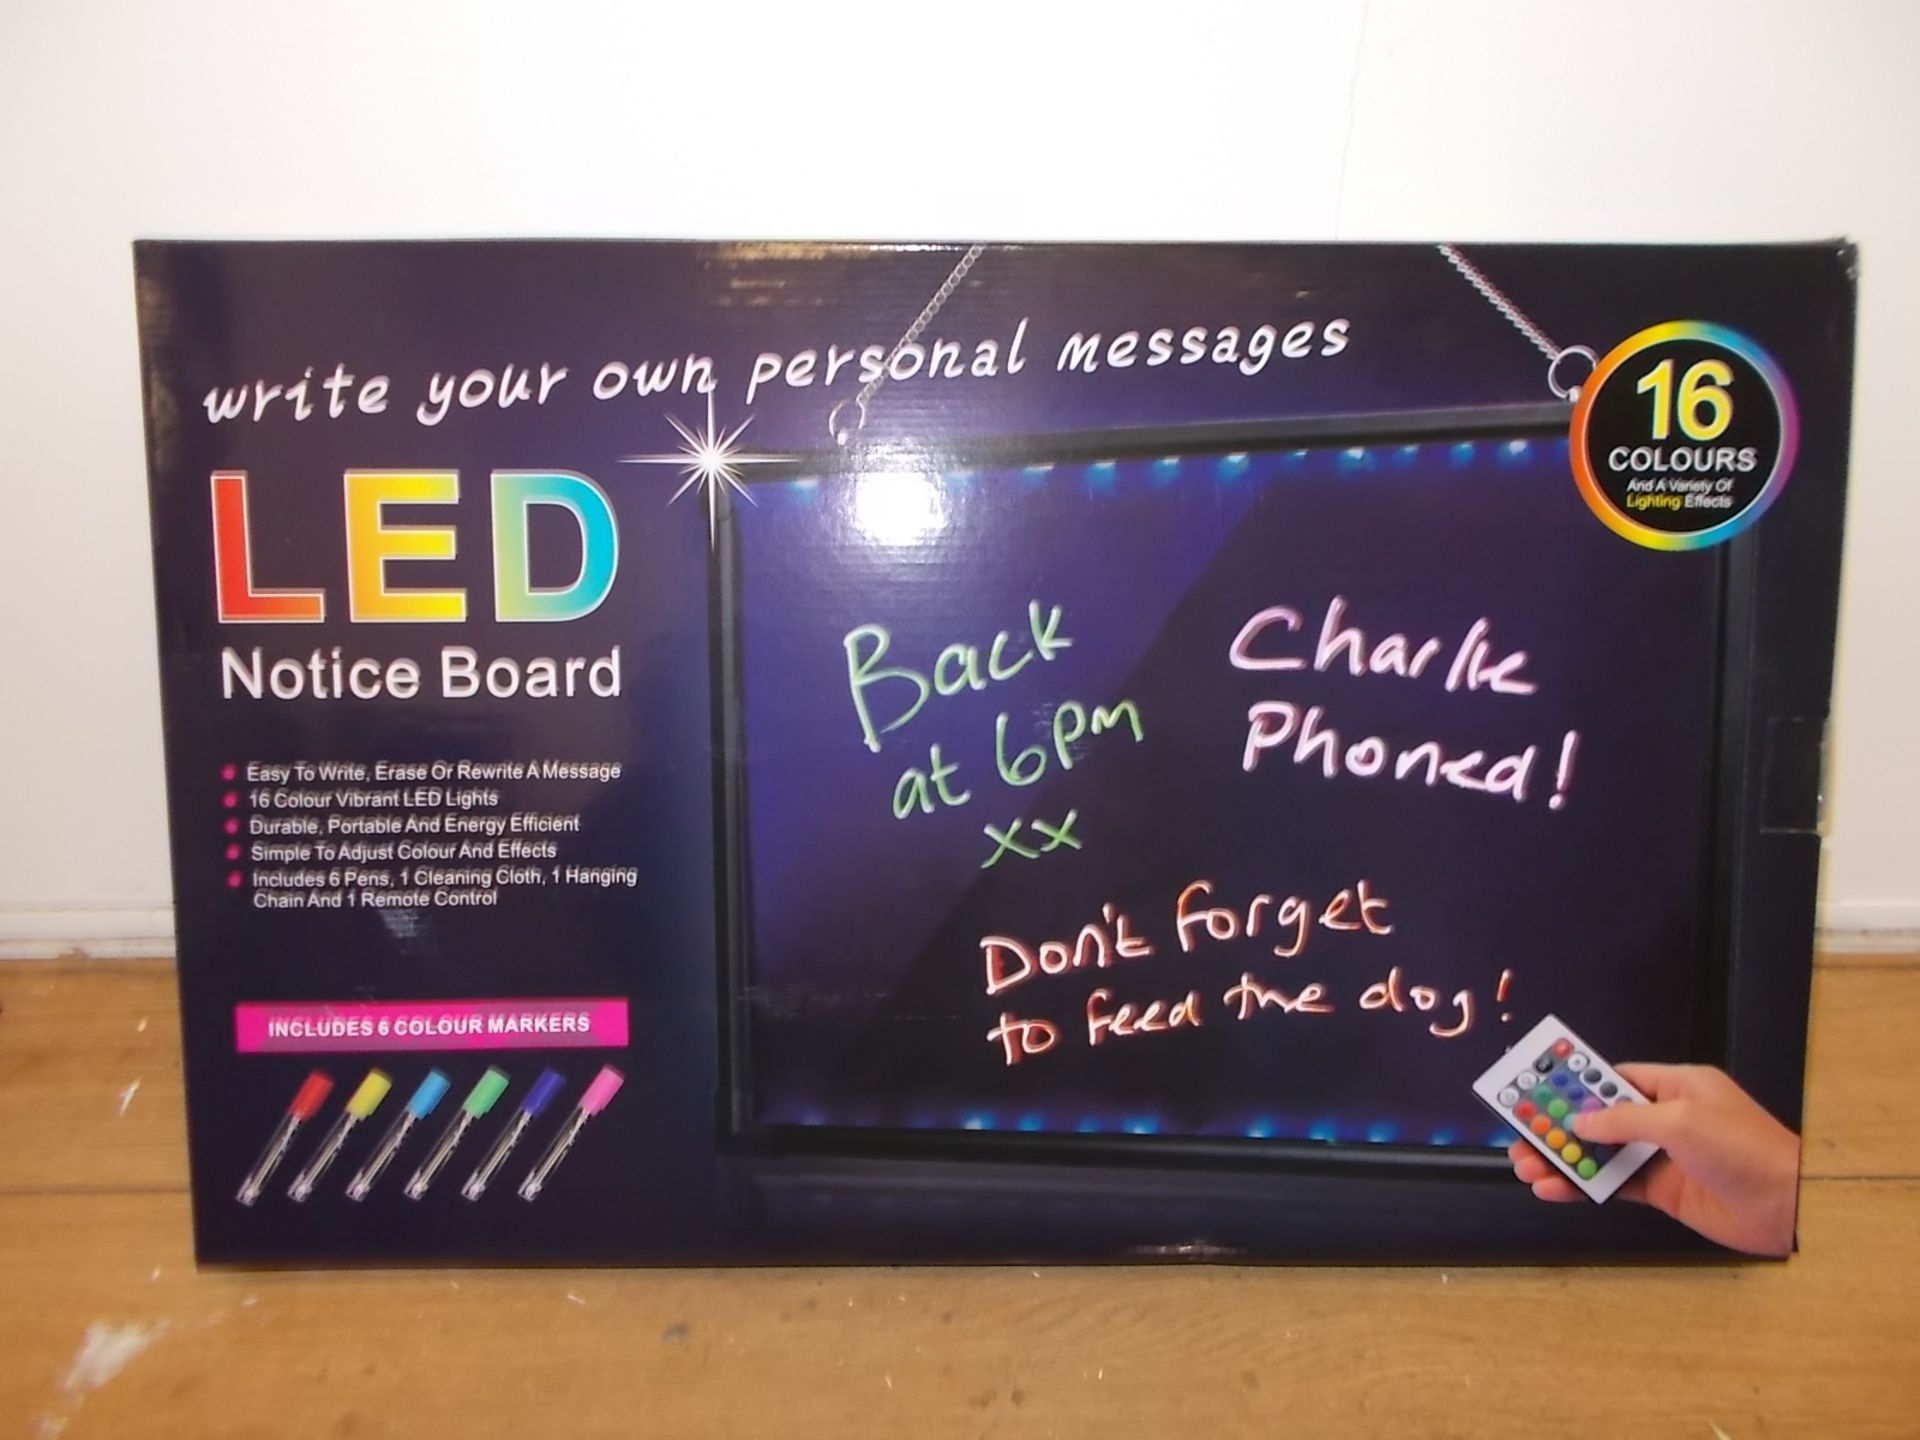 1 BRAND NEW BOXED LED NOTICE BOARD WITH 6 COLOUR MARKERS